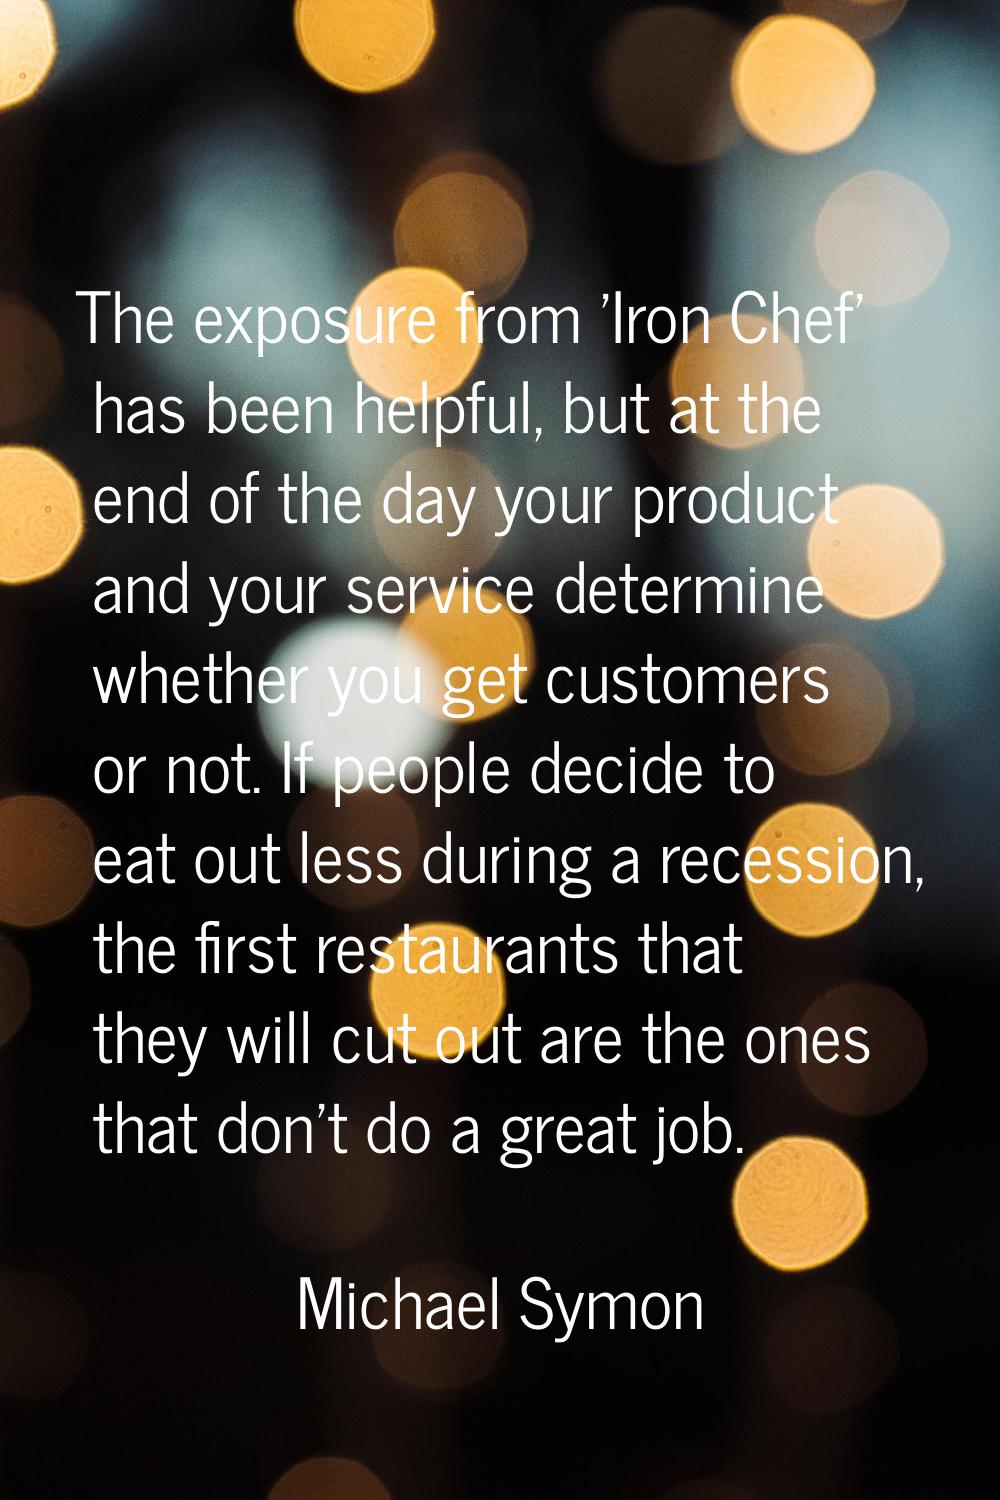 The exposure from 'Iron Chef' has been helpful, but at the end of the day your product and your ser